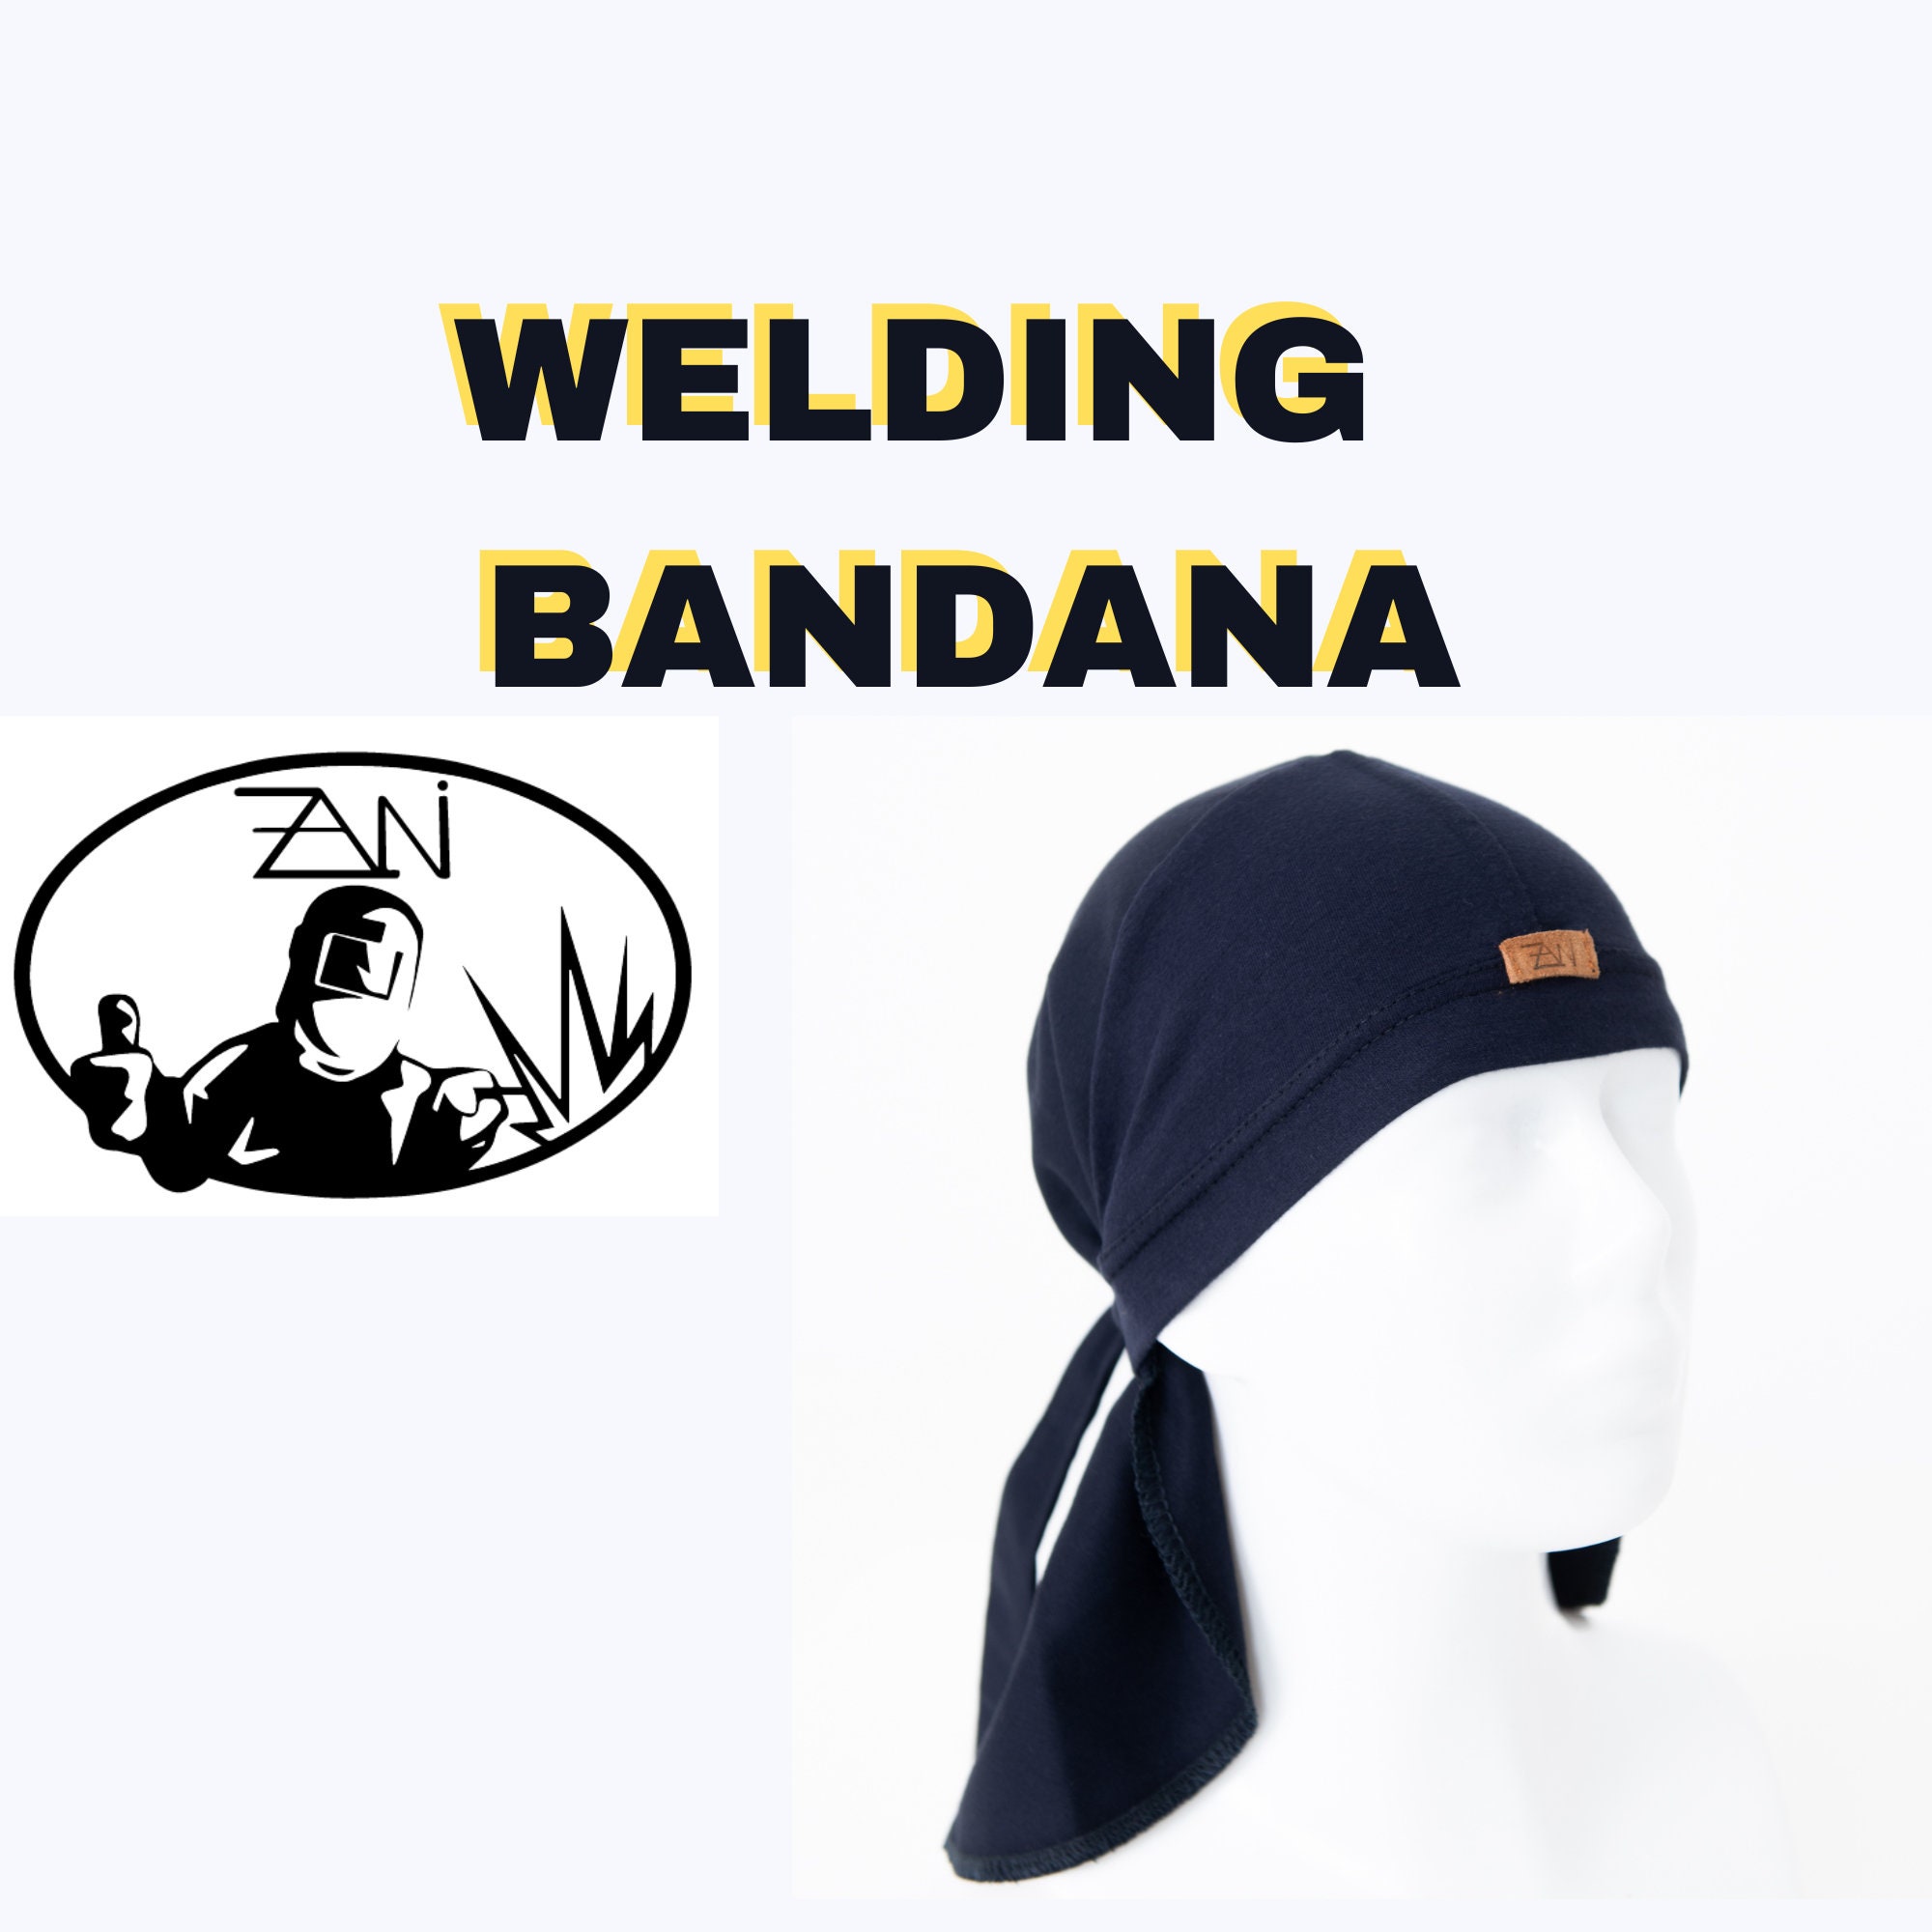 ZANiWELD Welding Balaclava for Best Welders FR Knitted Fabric Fits Perfectly with Split Leather Elements for More Safety and Style Elements